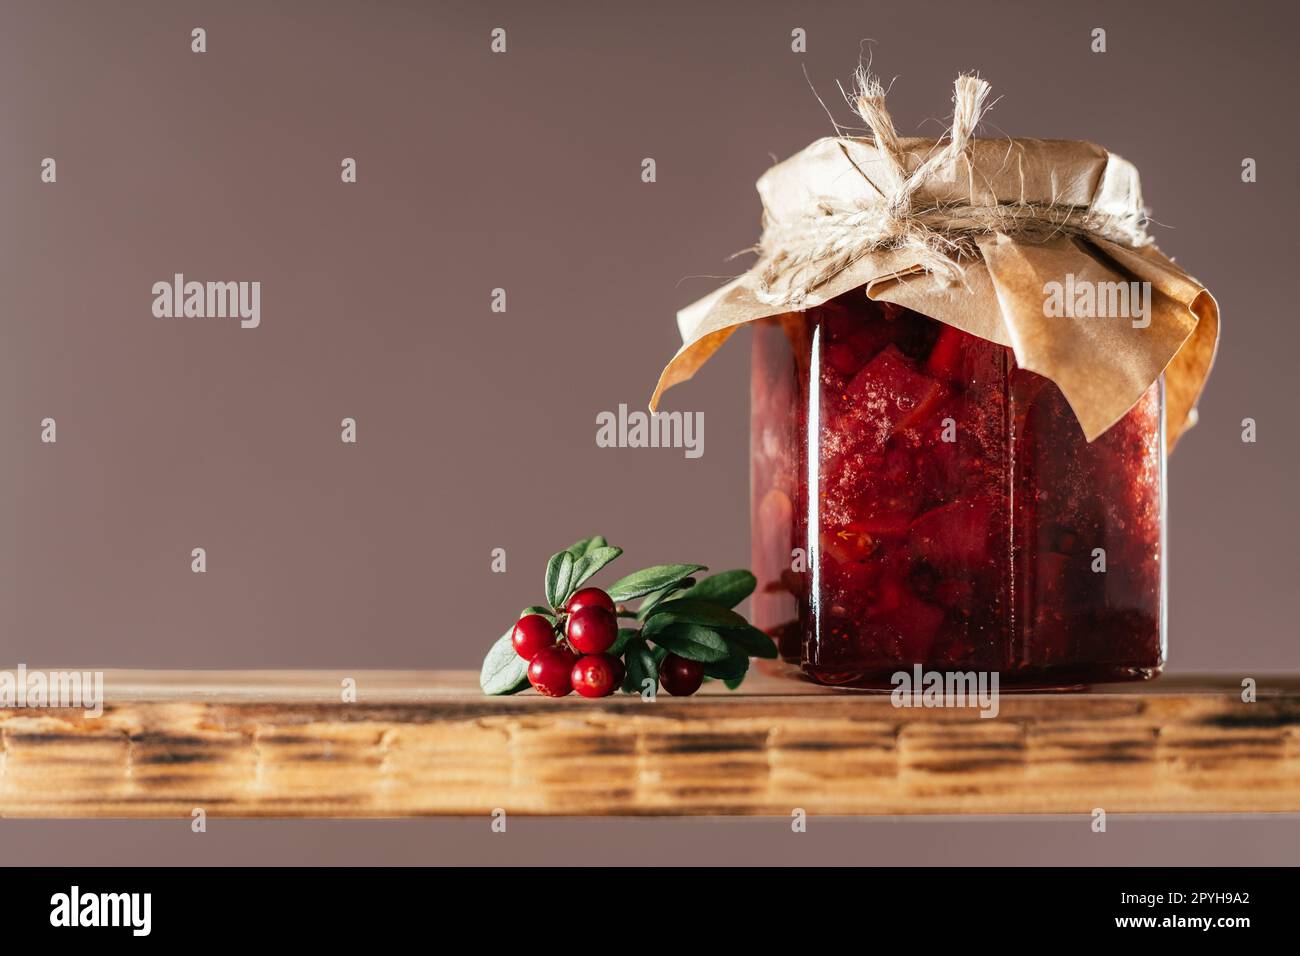 Jar of lingonberry and pear jam with craft paper on lid on wooden shelf next to fresh lingonberries on brown background Stock Photo